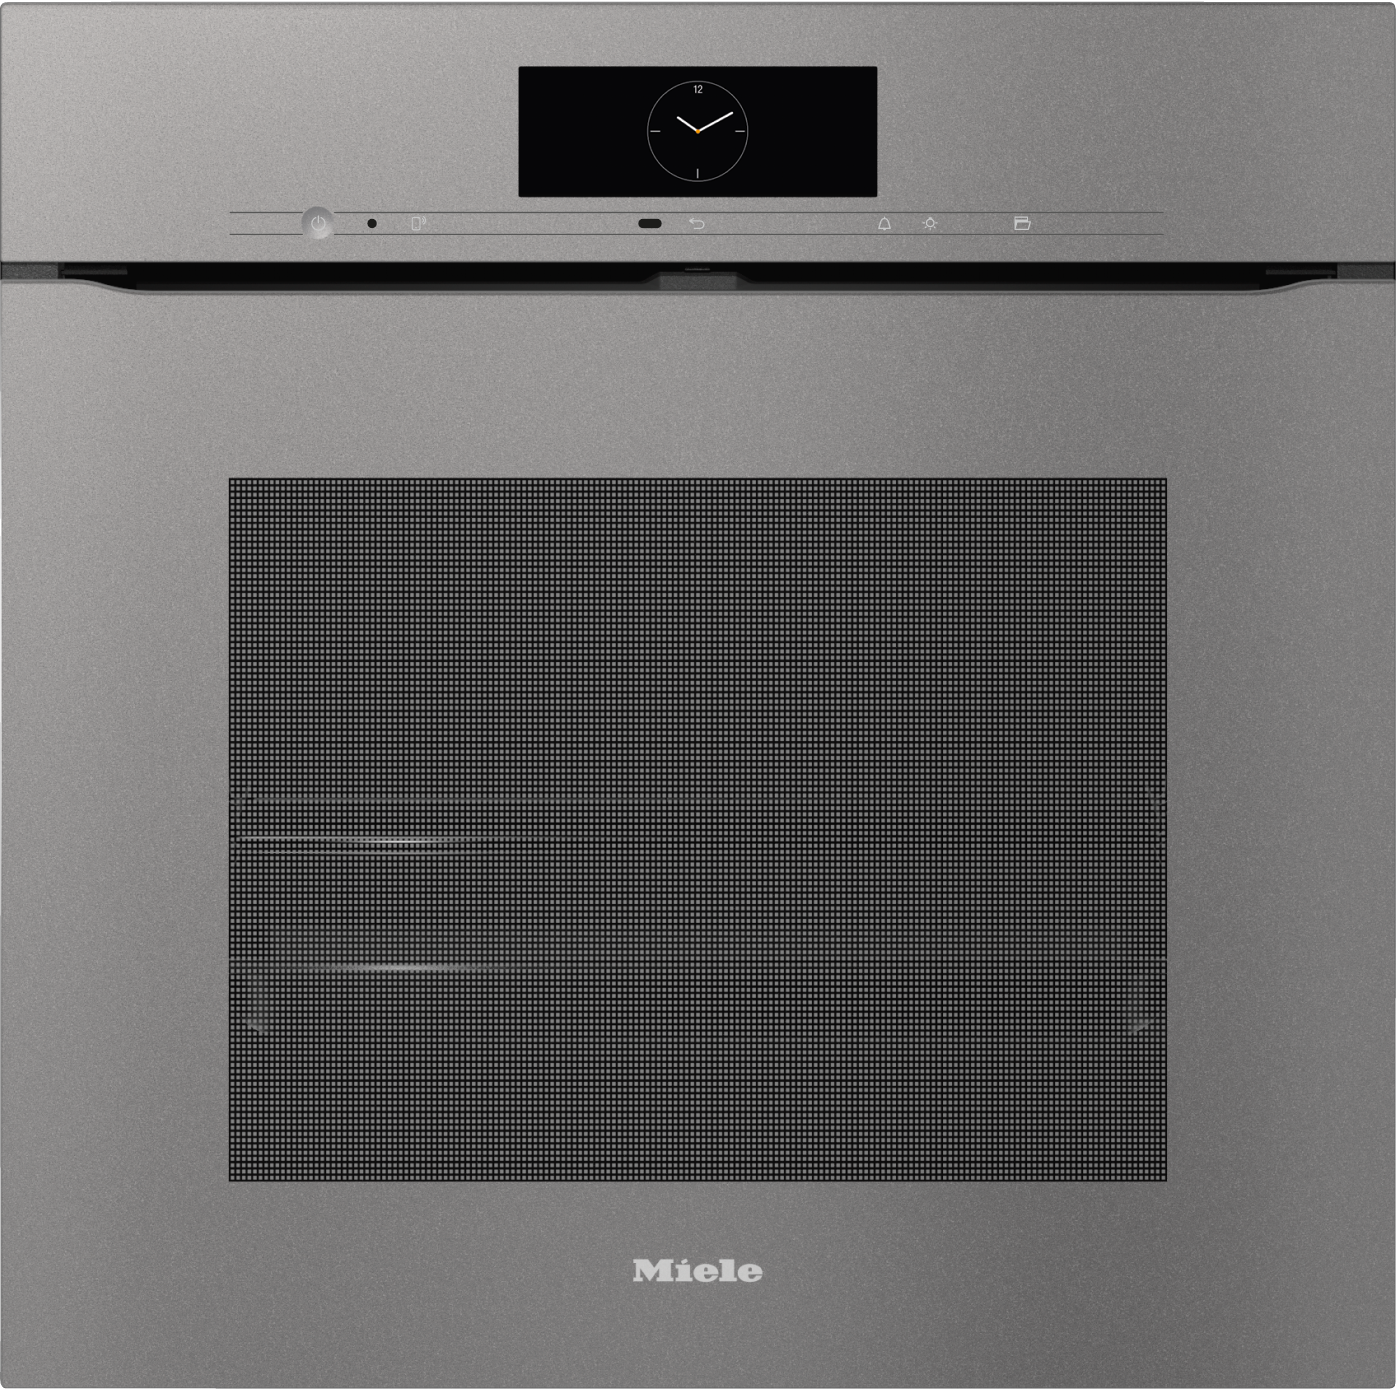 Miele Classic Oven Manual Download